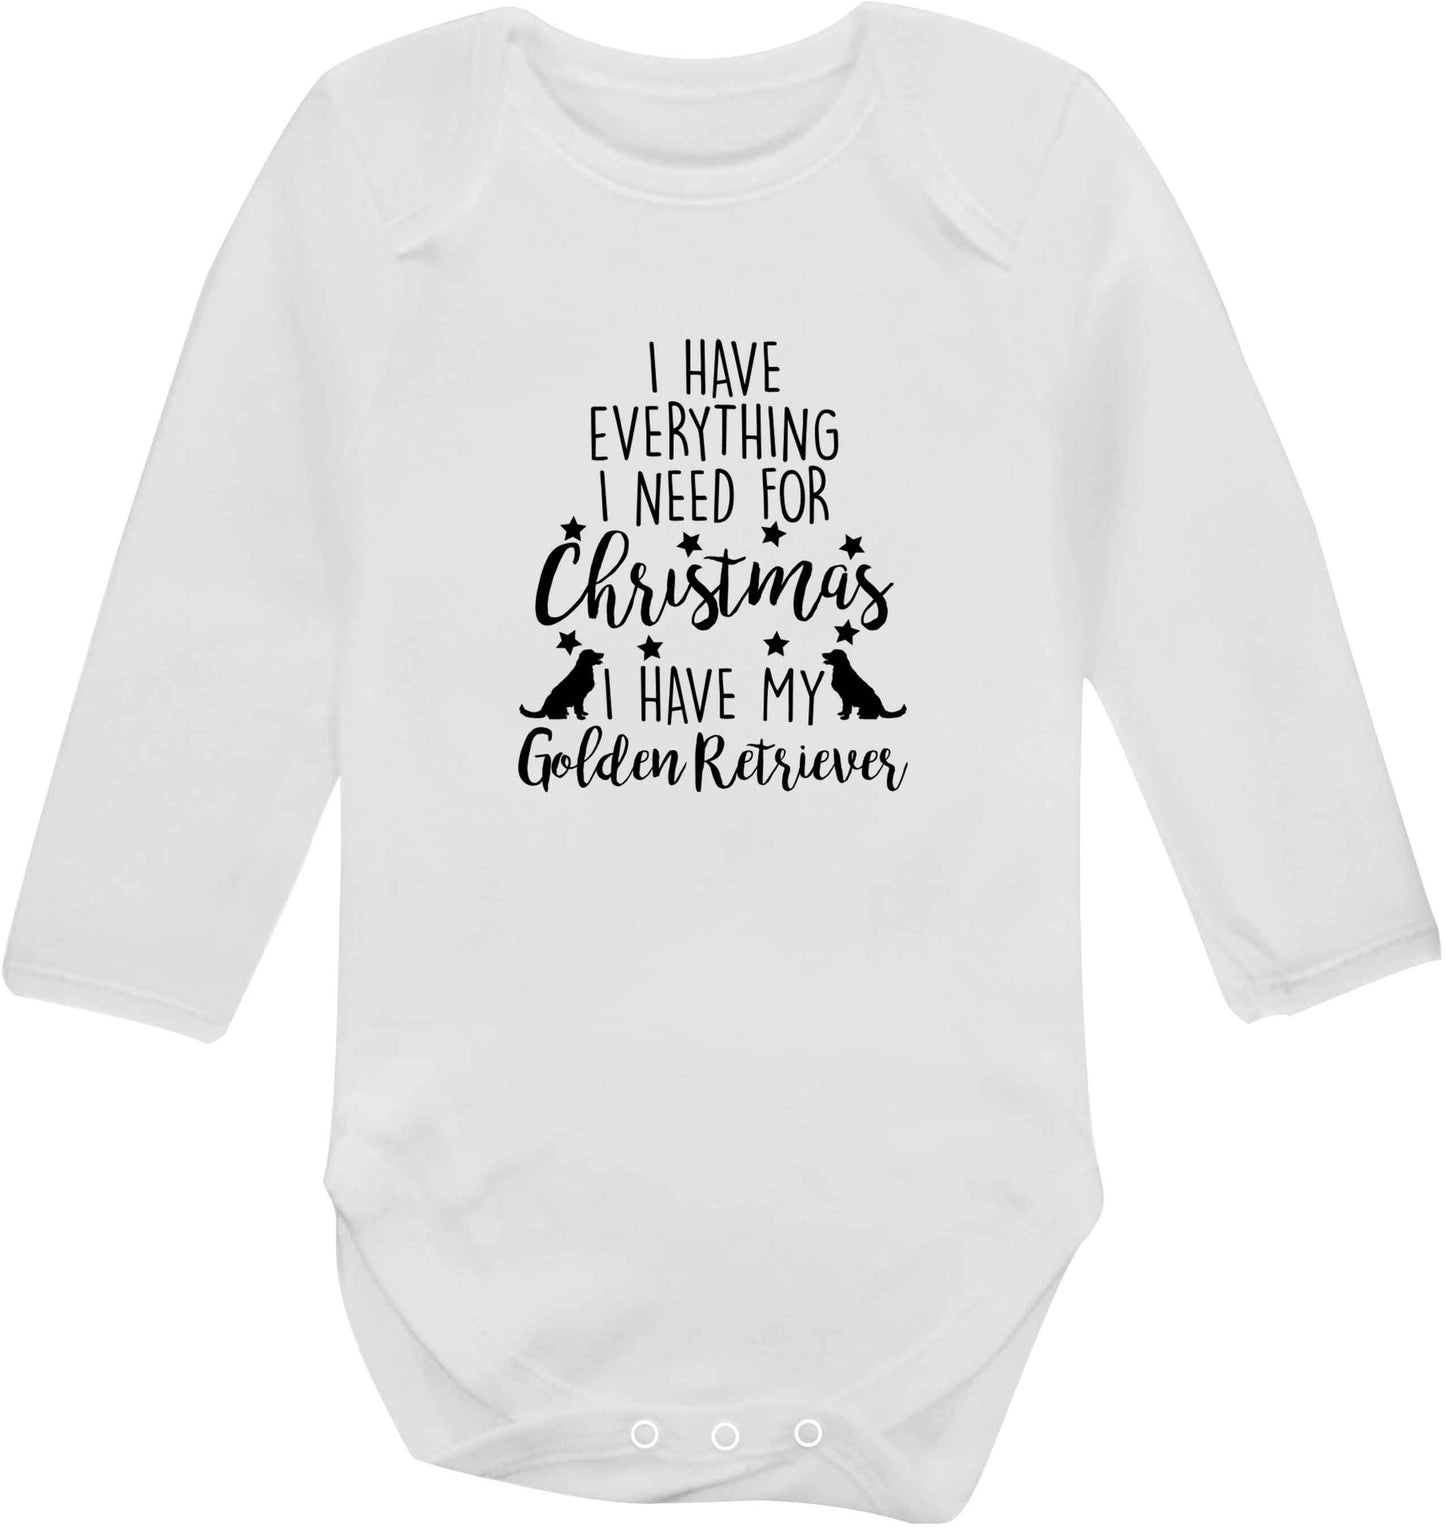 I have everything I need for Christmas I have my golden retriever baby vest long sleeved white 6-12 months